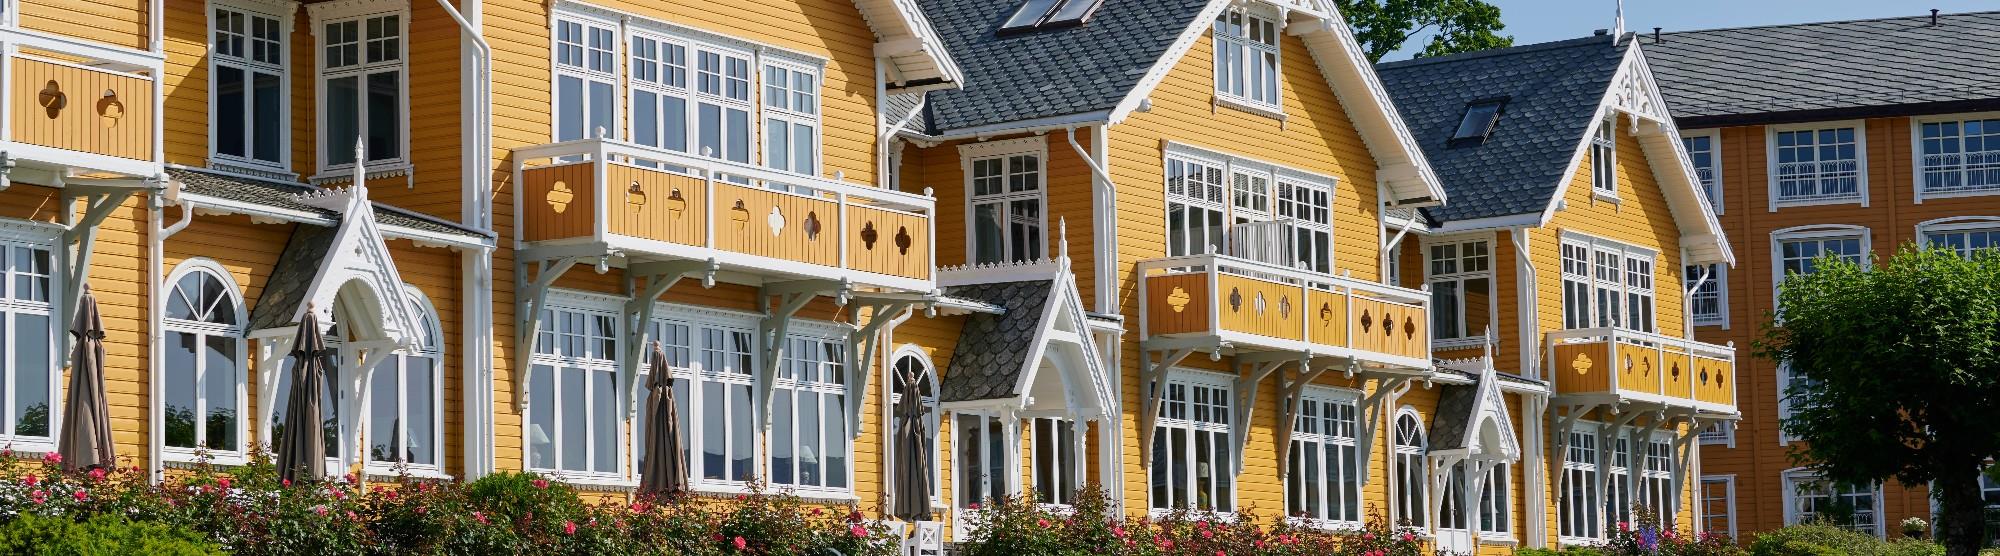 Stay in a fjord hotel in beautiful surroundings close to Bergen.